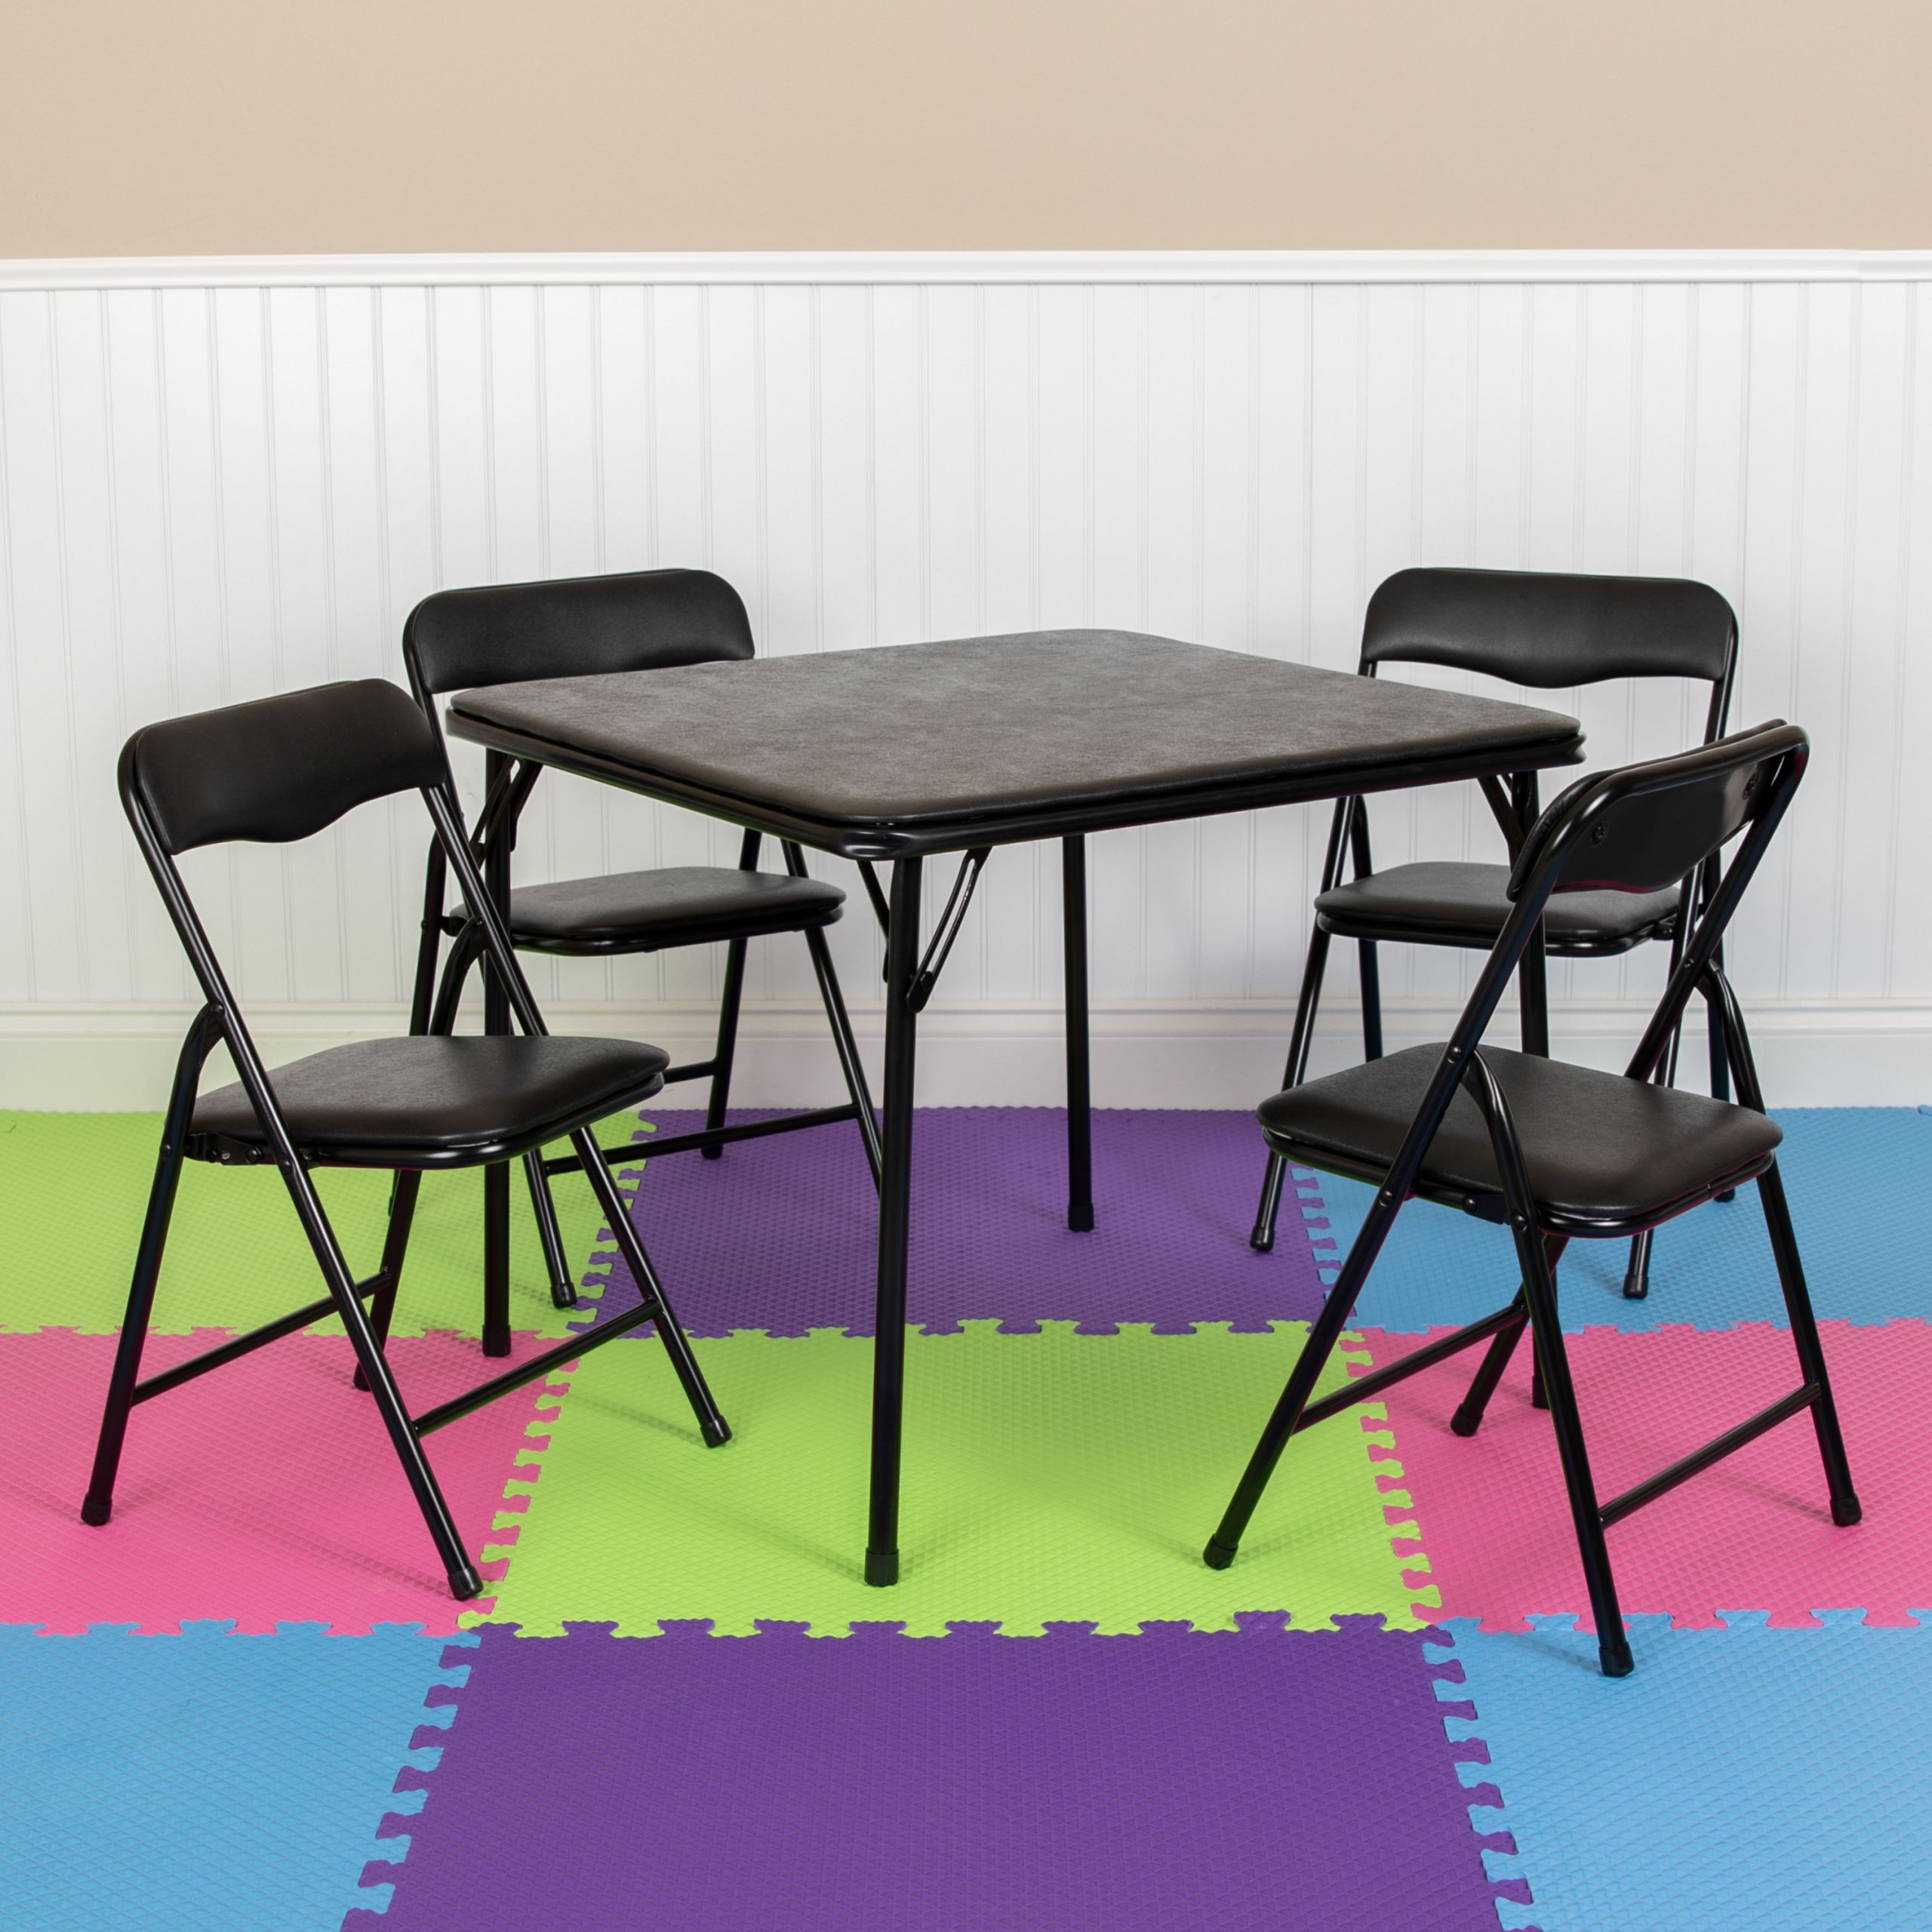 Kids Foldable Table And Chairs
 Flash Furniture Kids Black 5 Piece Folding Table and Chair